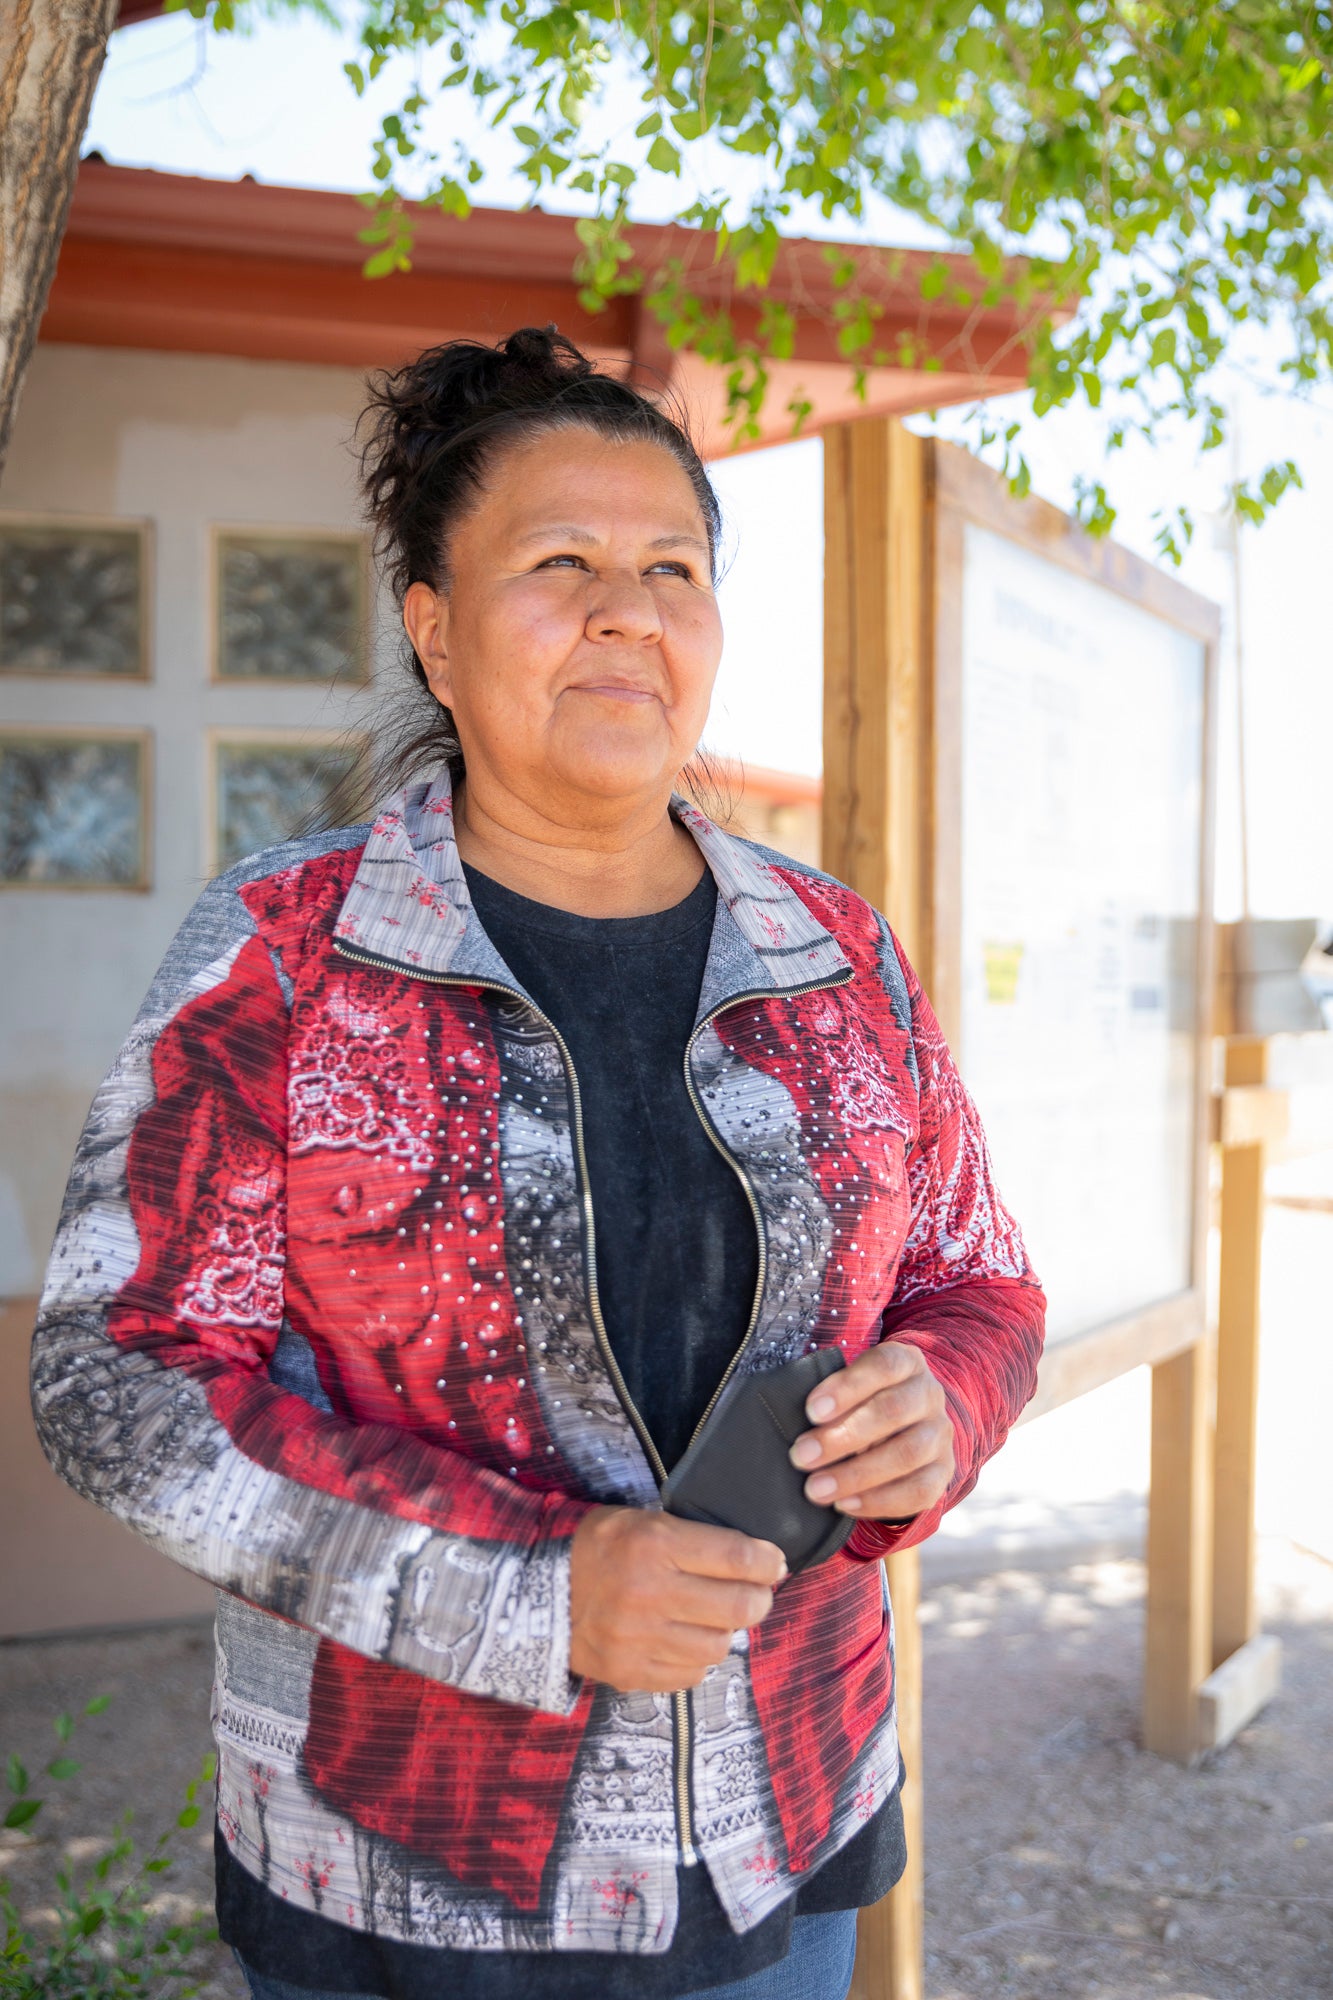 Cindy Howe, manager of the Navajo Water Project, outside the Baca/Prewitt Chapter house in Prewitt, New Mexico